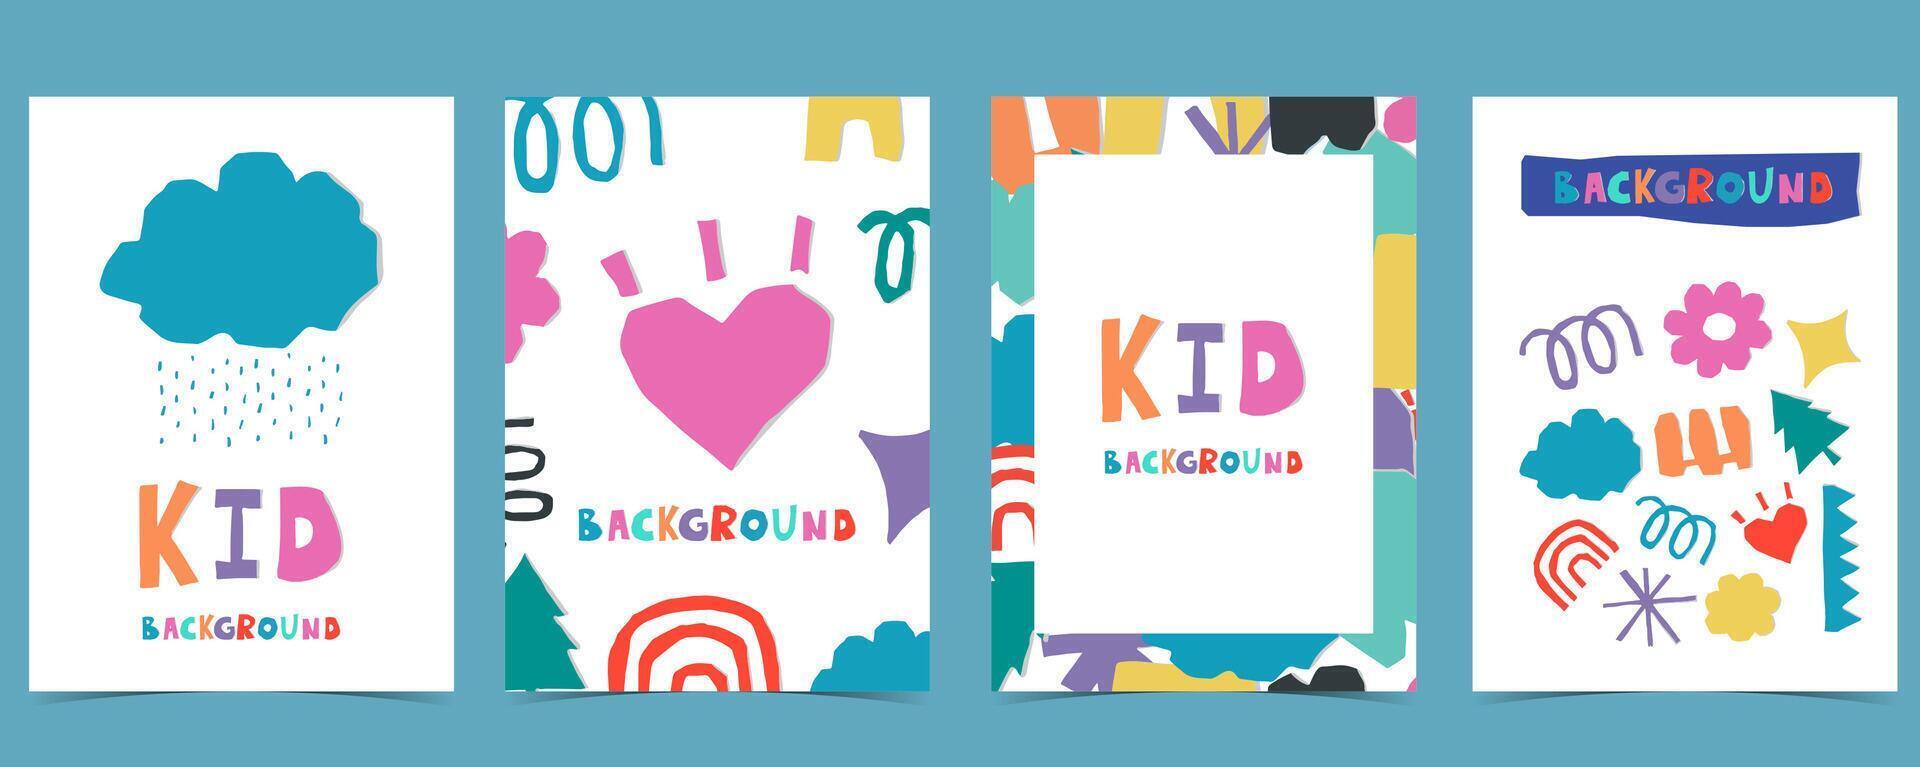 shape paper cut out background with colorful.illustration vector for a4 vertical kid design